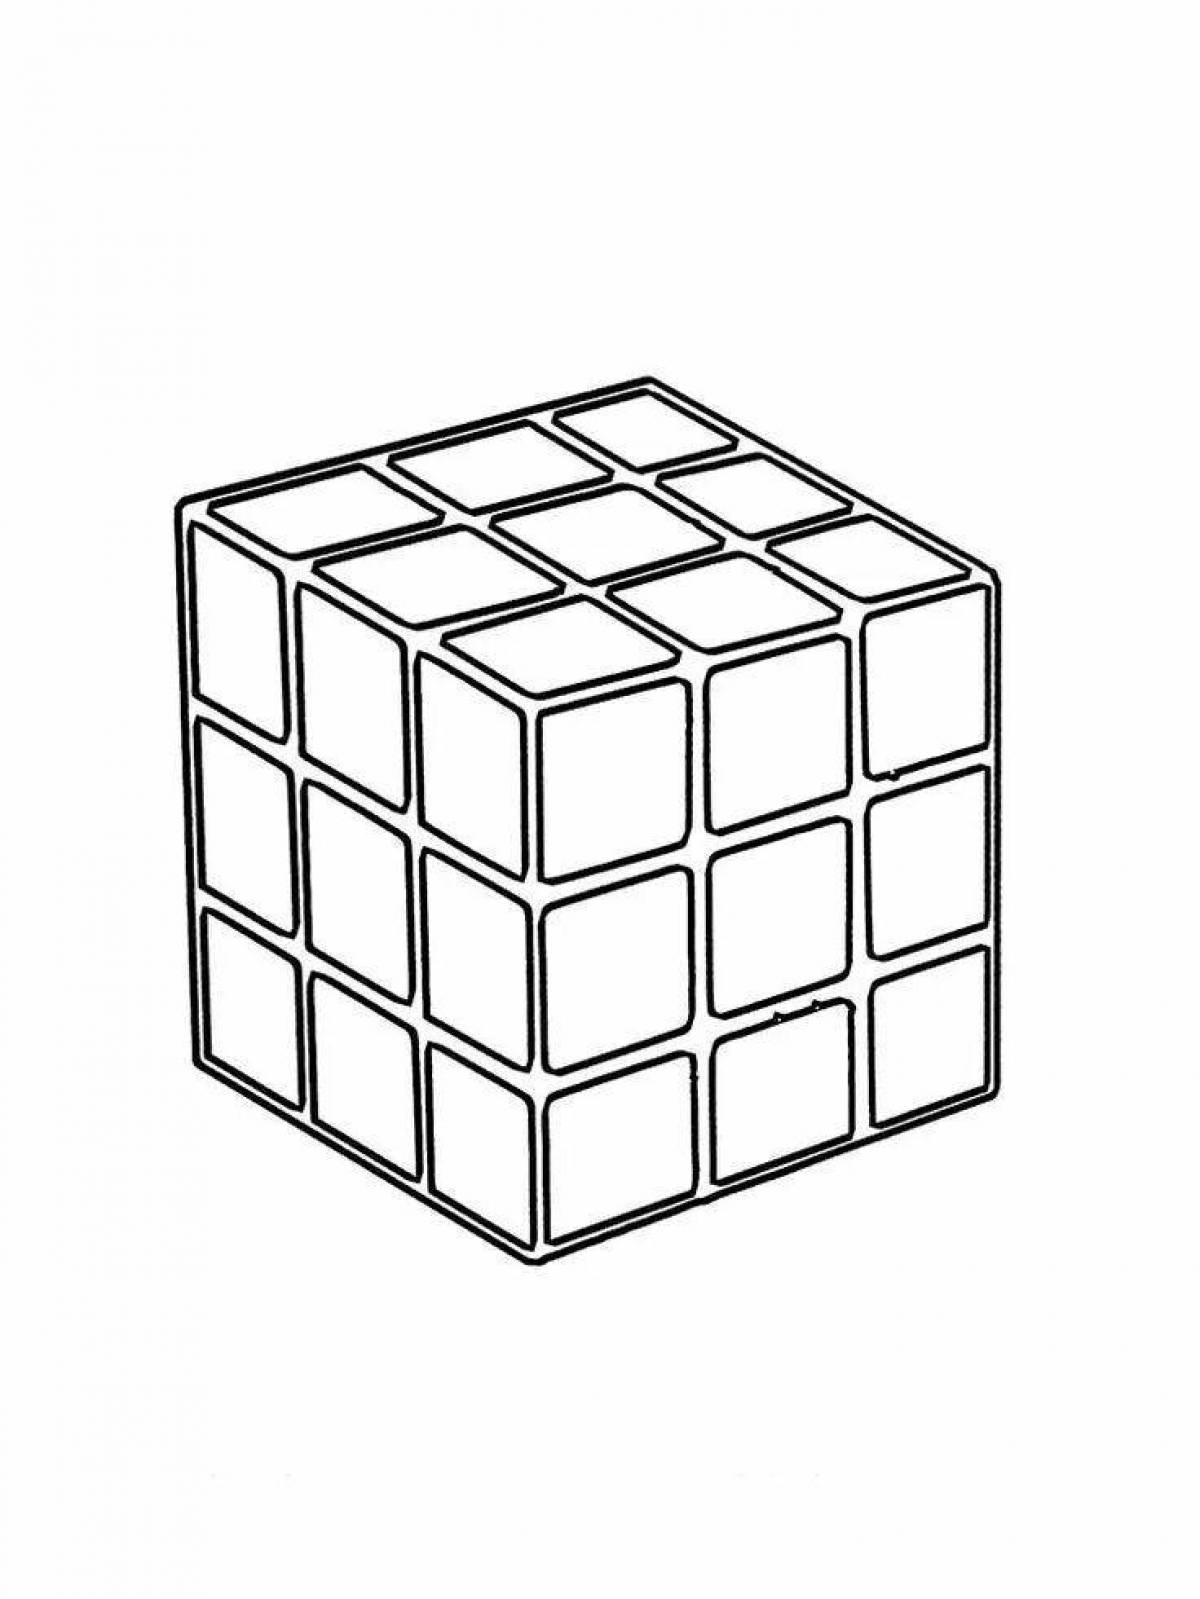 Intriguing cube coloring page